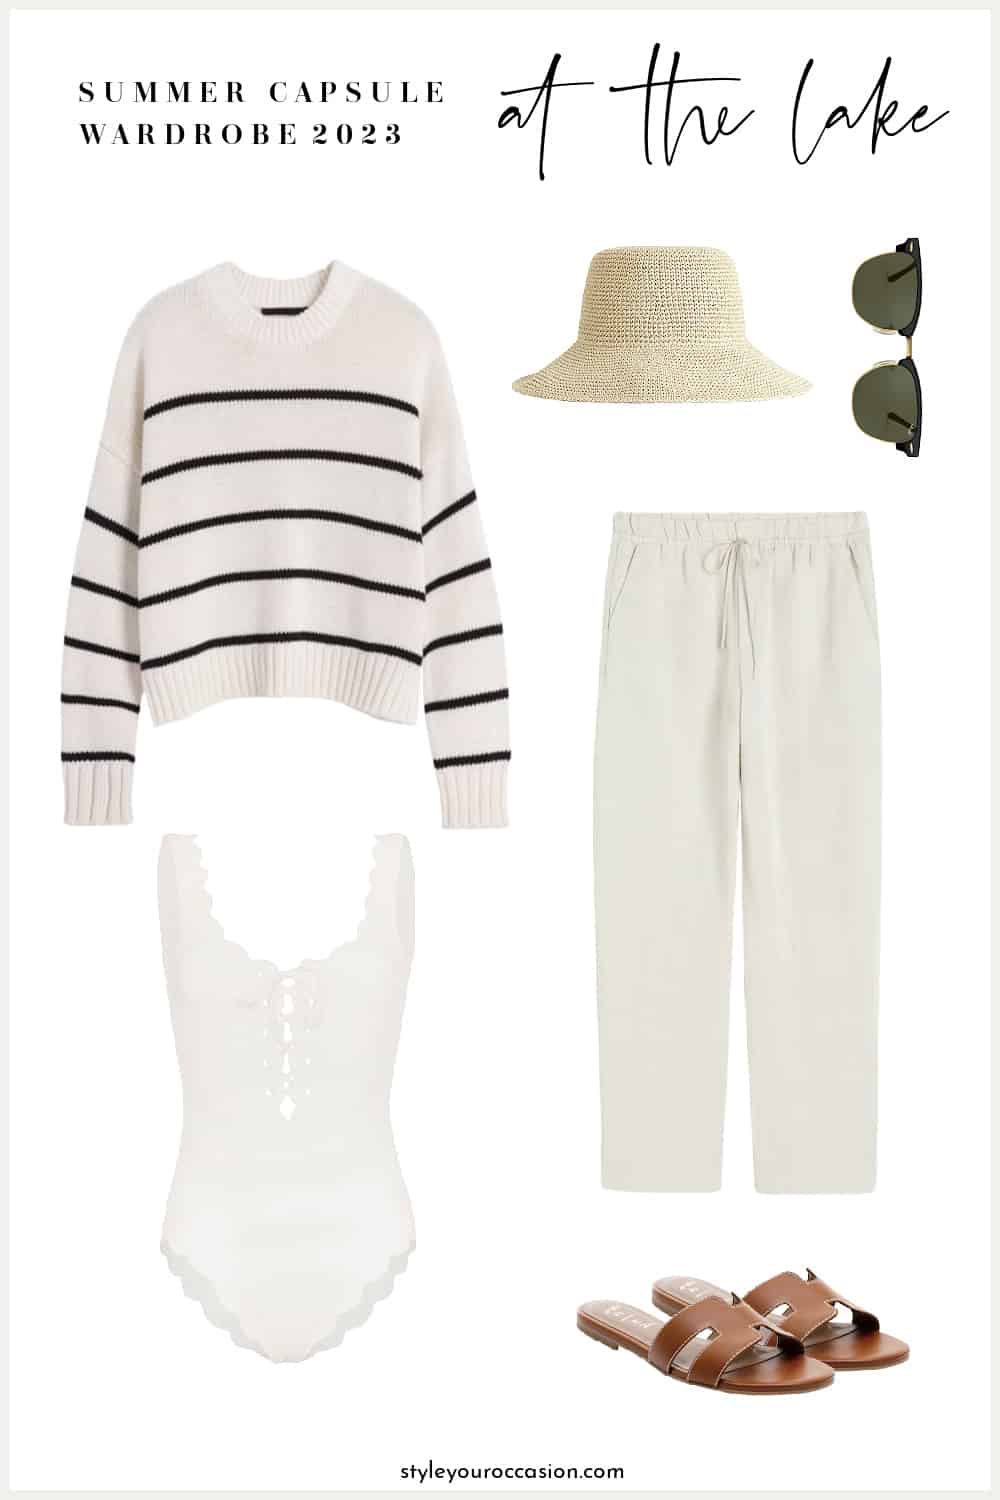 outfit mood board for a summer capsule wardrobe with a striped knit sweater, beige linen pants, a raffia bucket hat, white swimsuit, sunglasses, and brown sandals